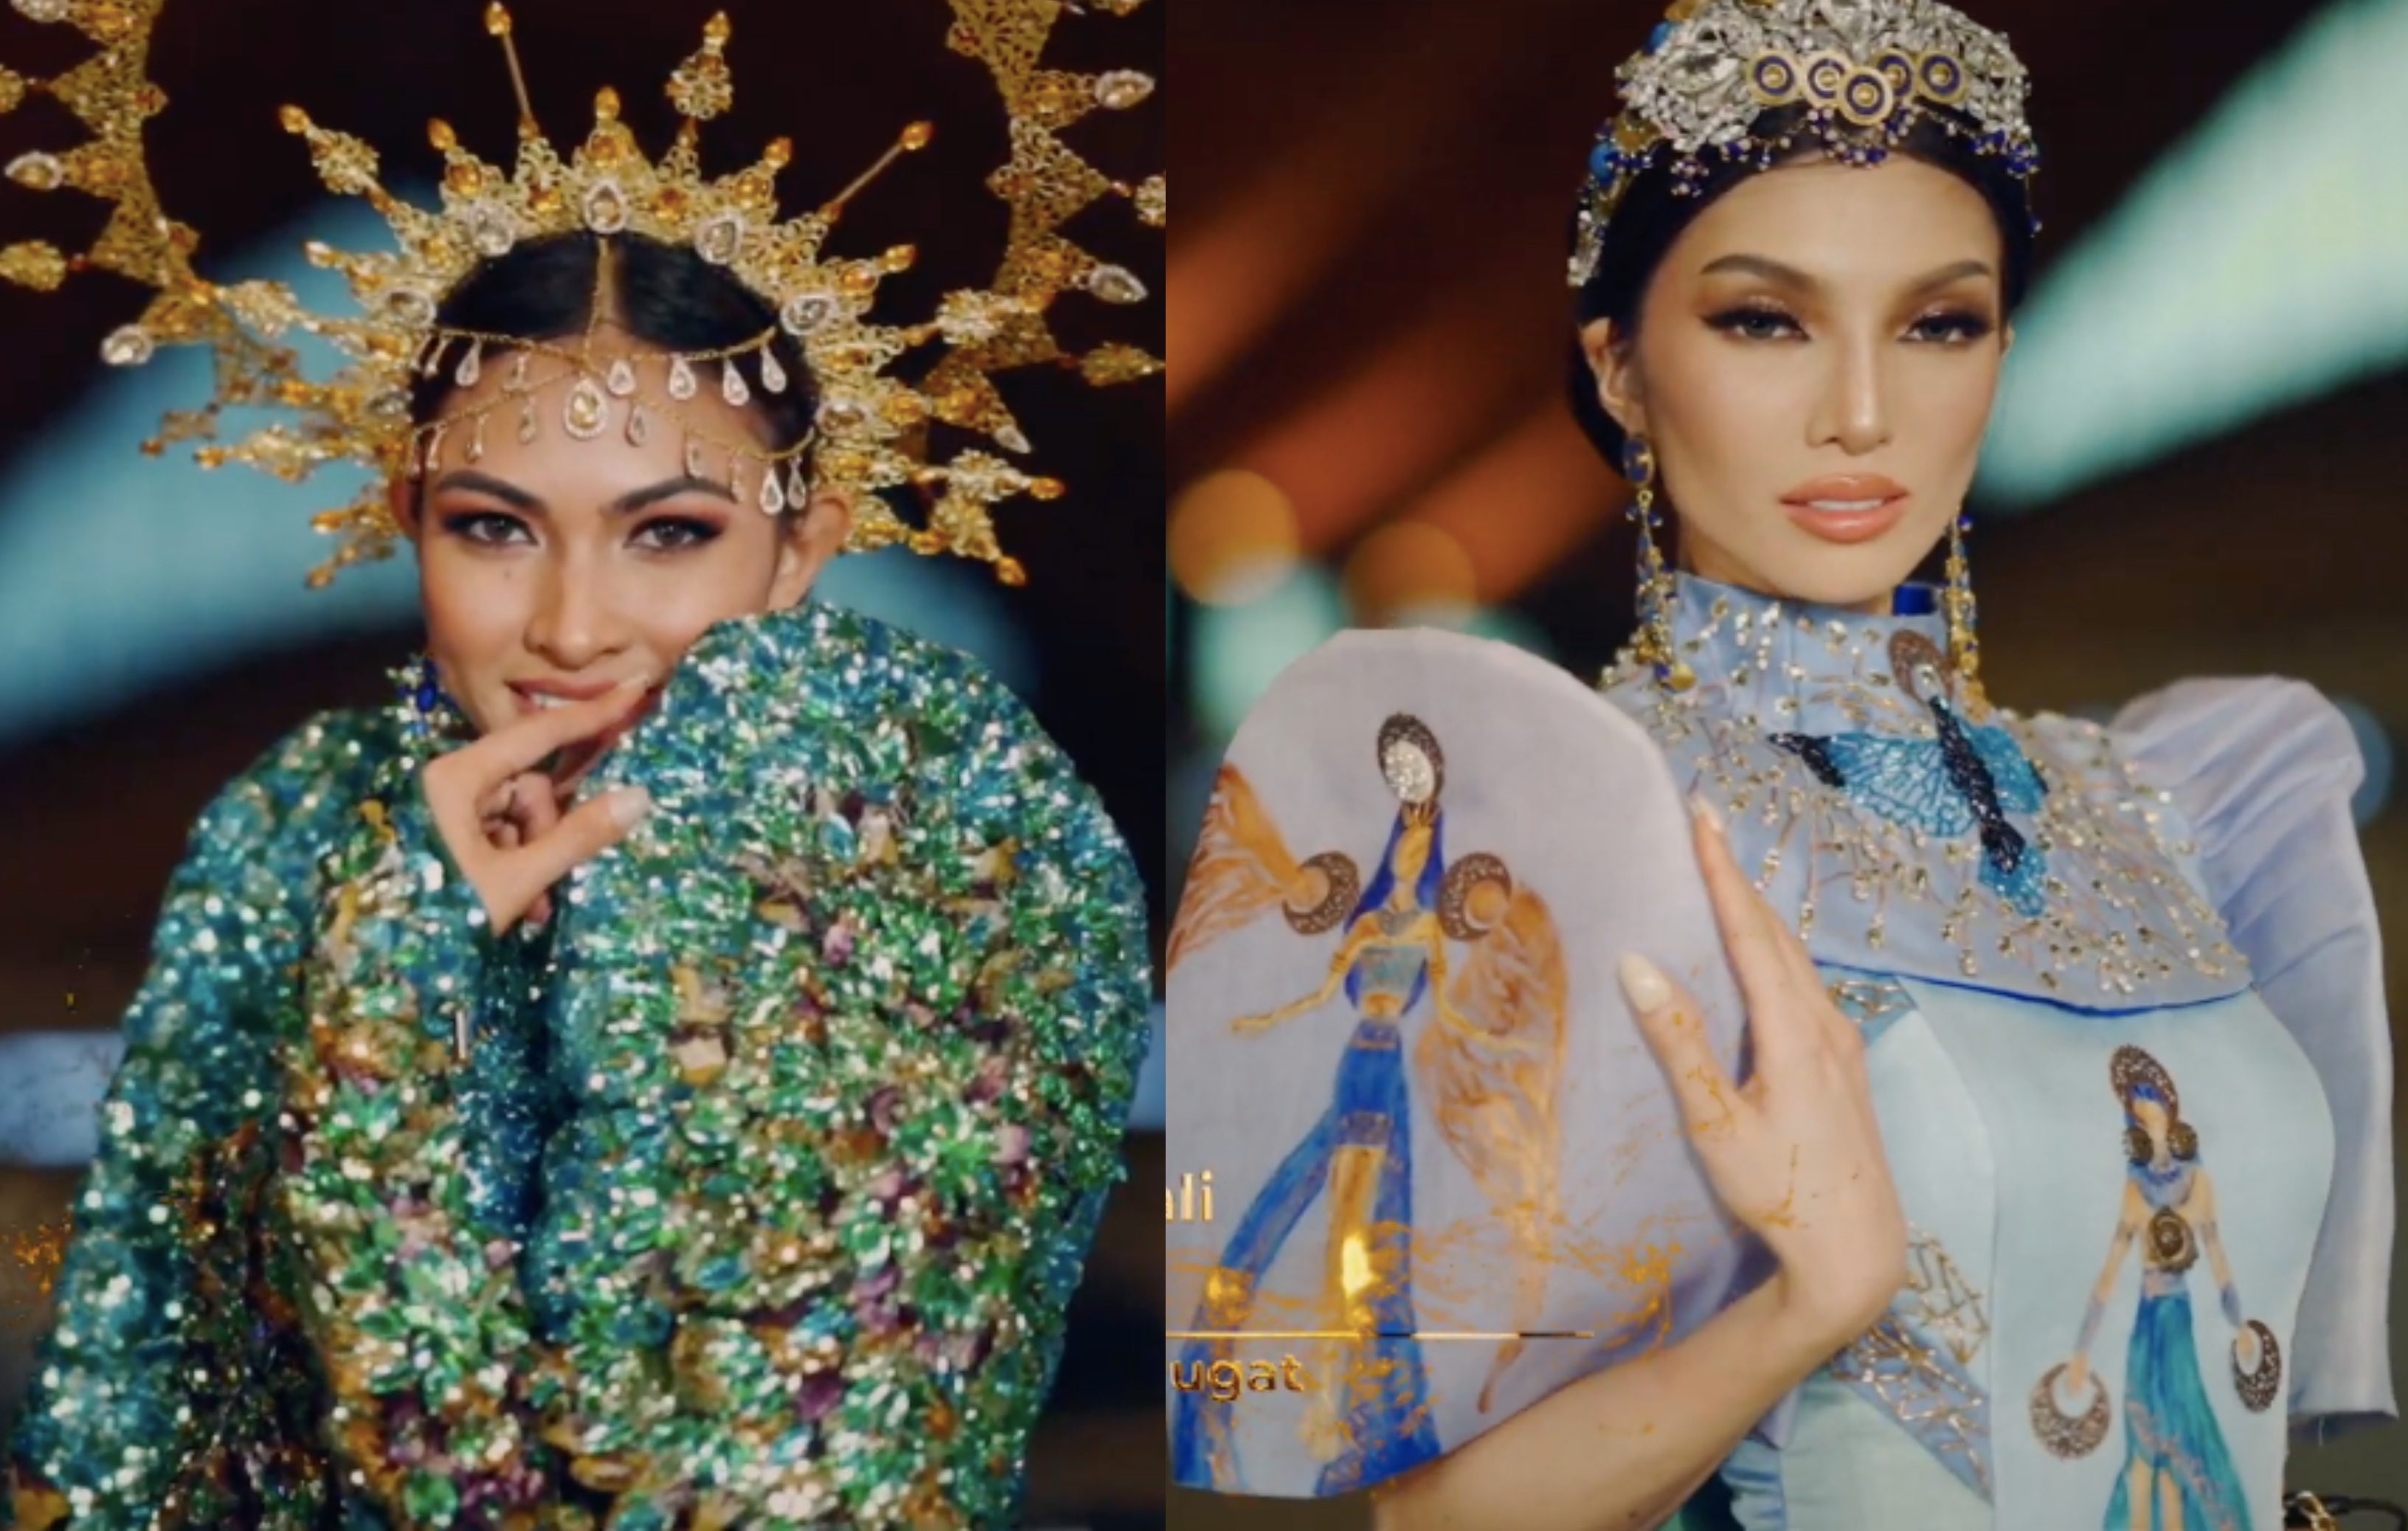 IN PHOTOS: The Miss Universe PH 2021 candidates in their national costumes